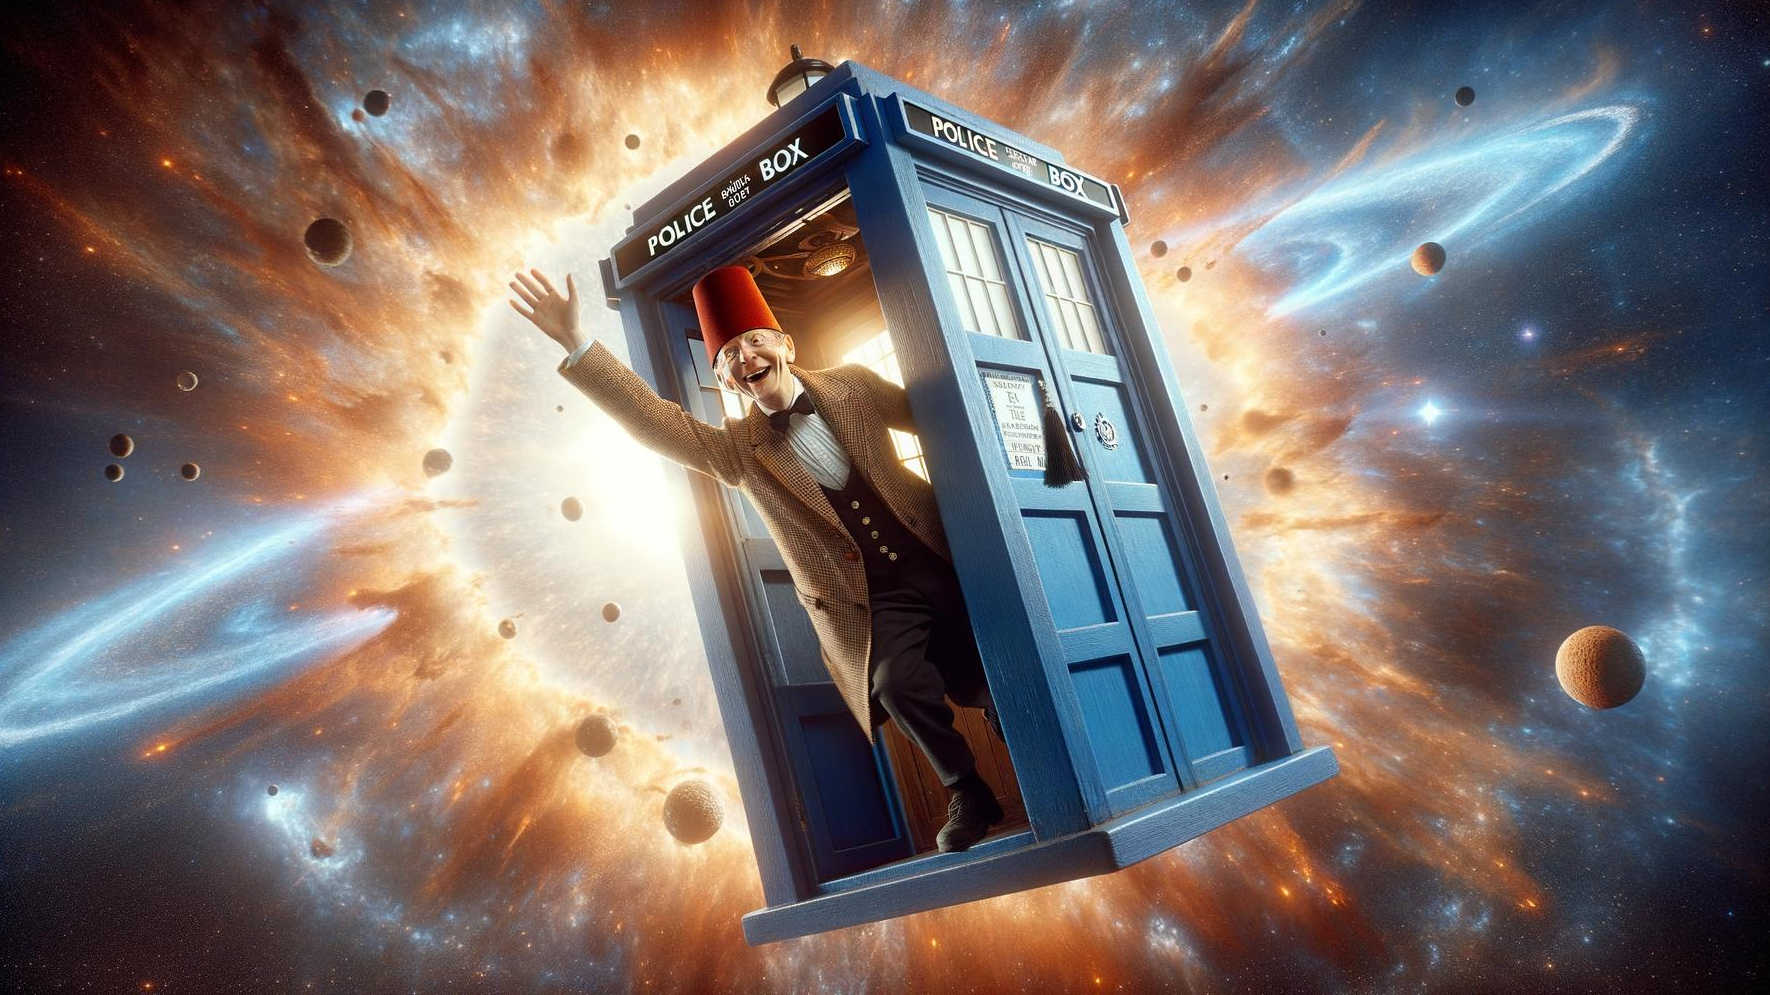 No idea which version of The Doctor this is, but waving at passing spaceships while a supernova explodes behind him is a thing he'd do!